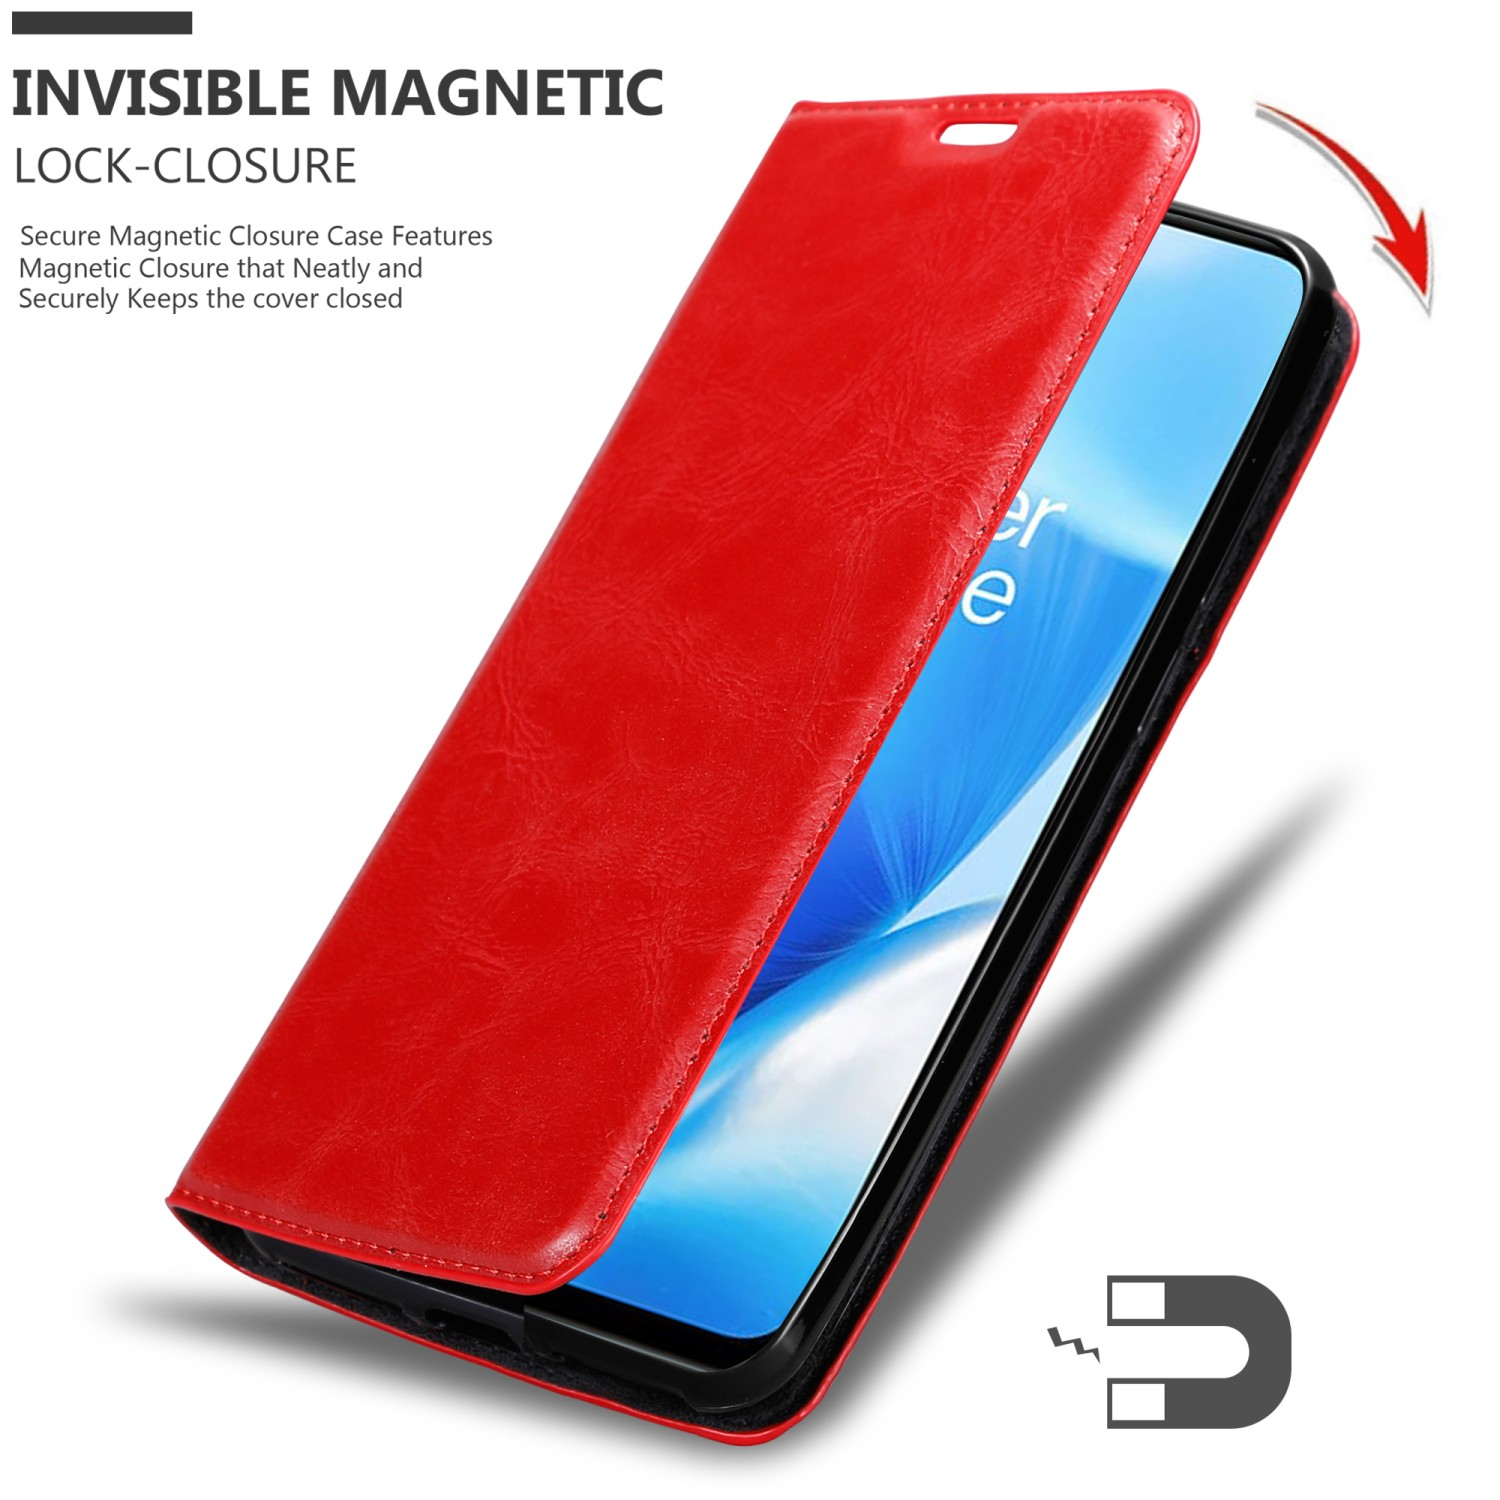 Bookcover, 5G, ROT APFEL Book OnePlus, Magnet, CADORABO Invisible Nord Hülle N200